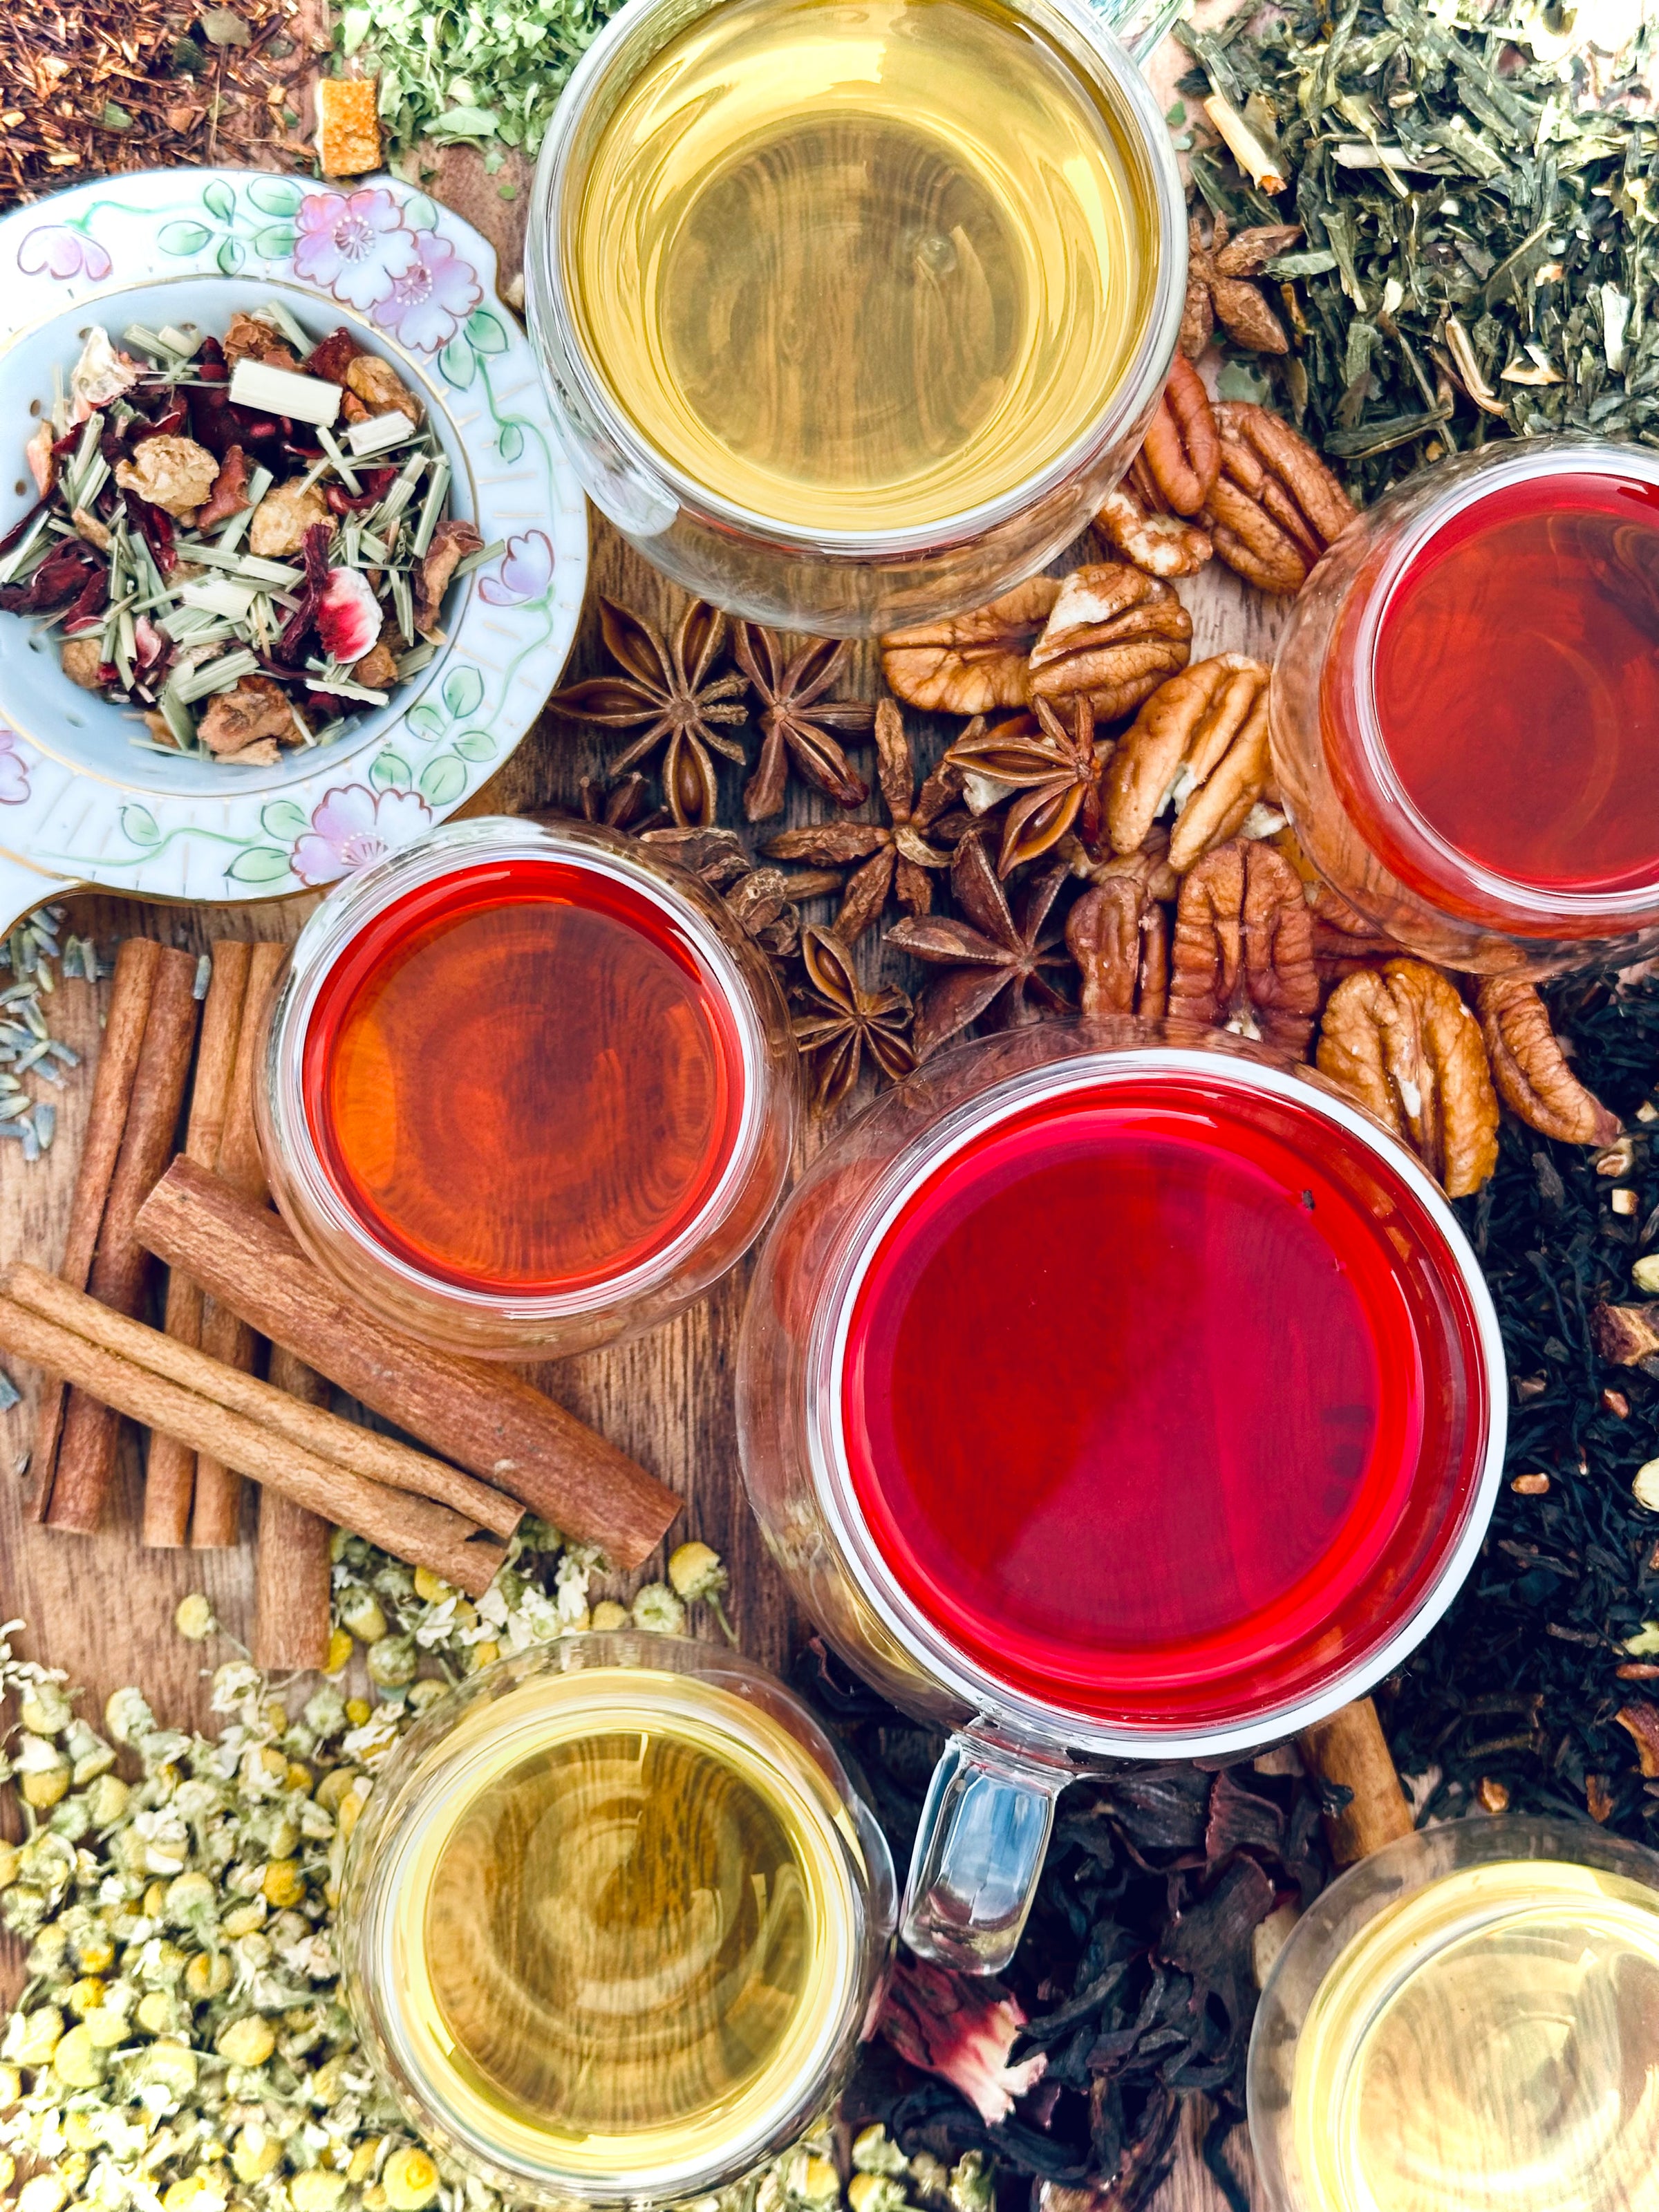 Tea, Blends, and Infusions